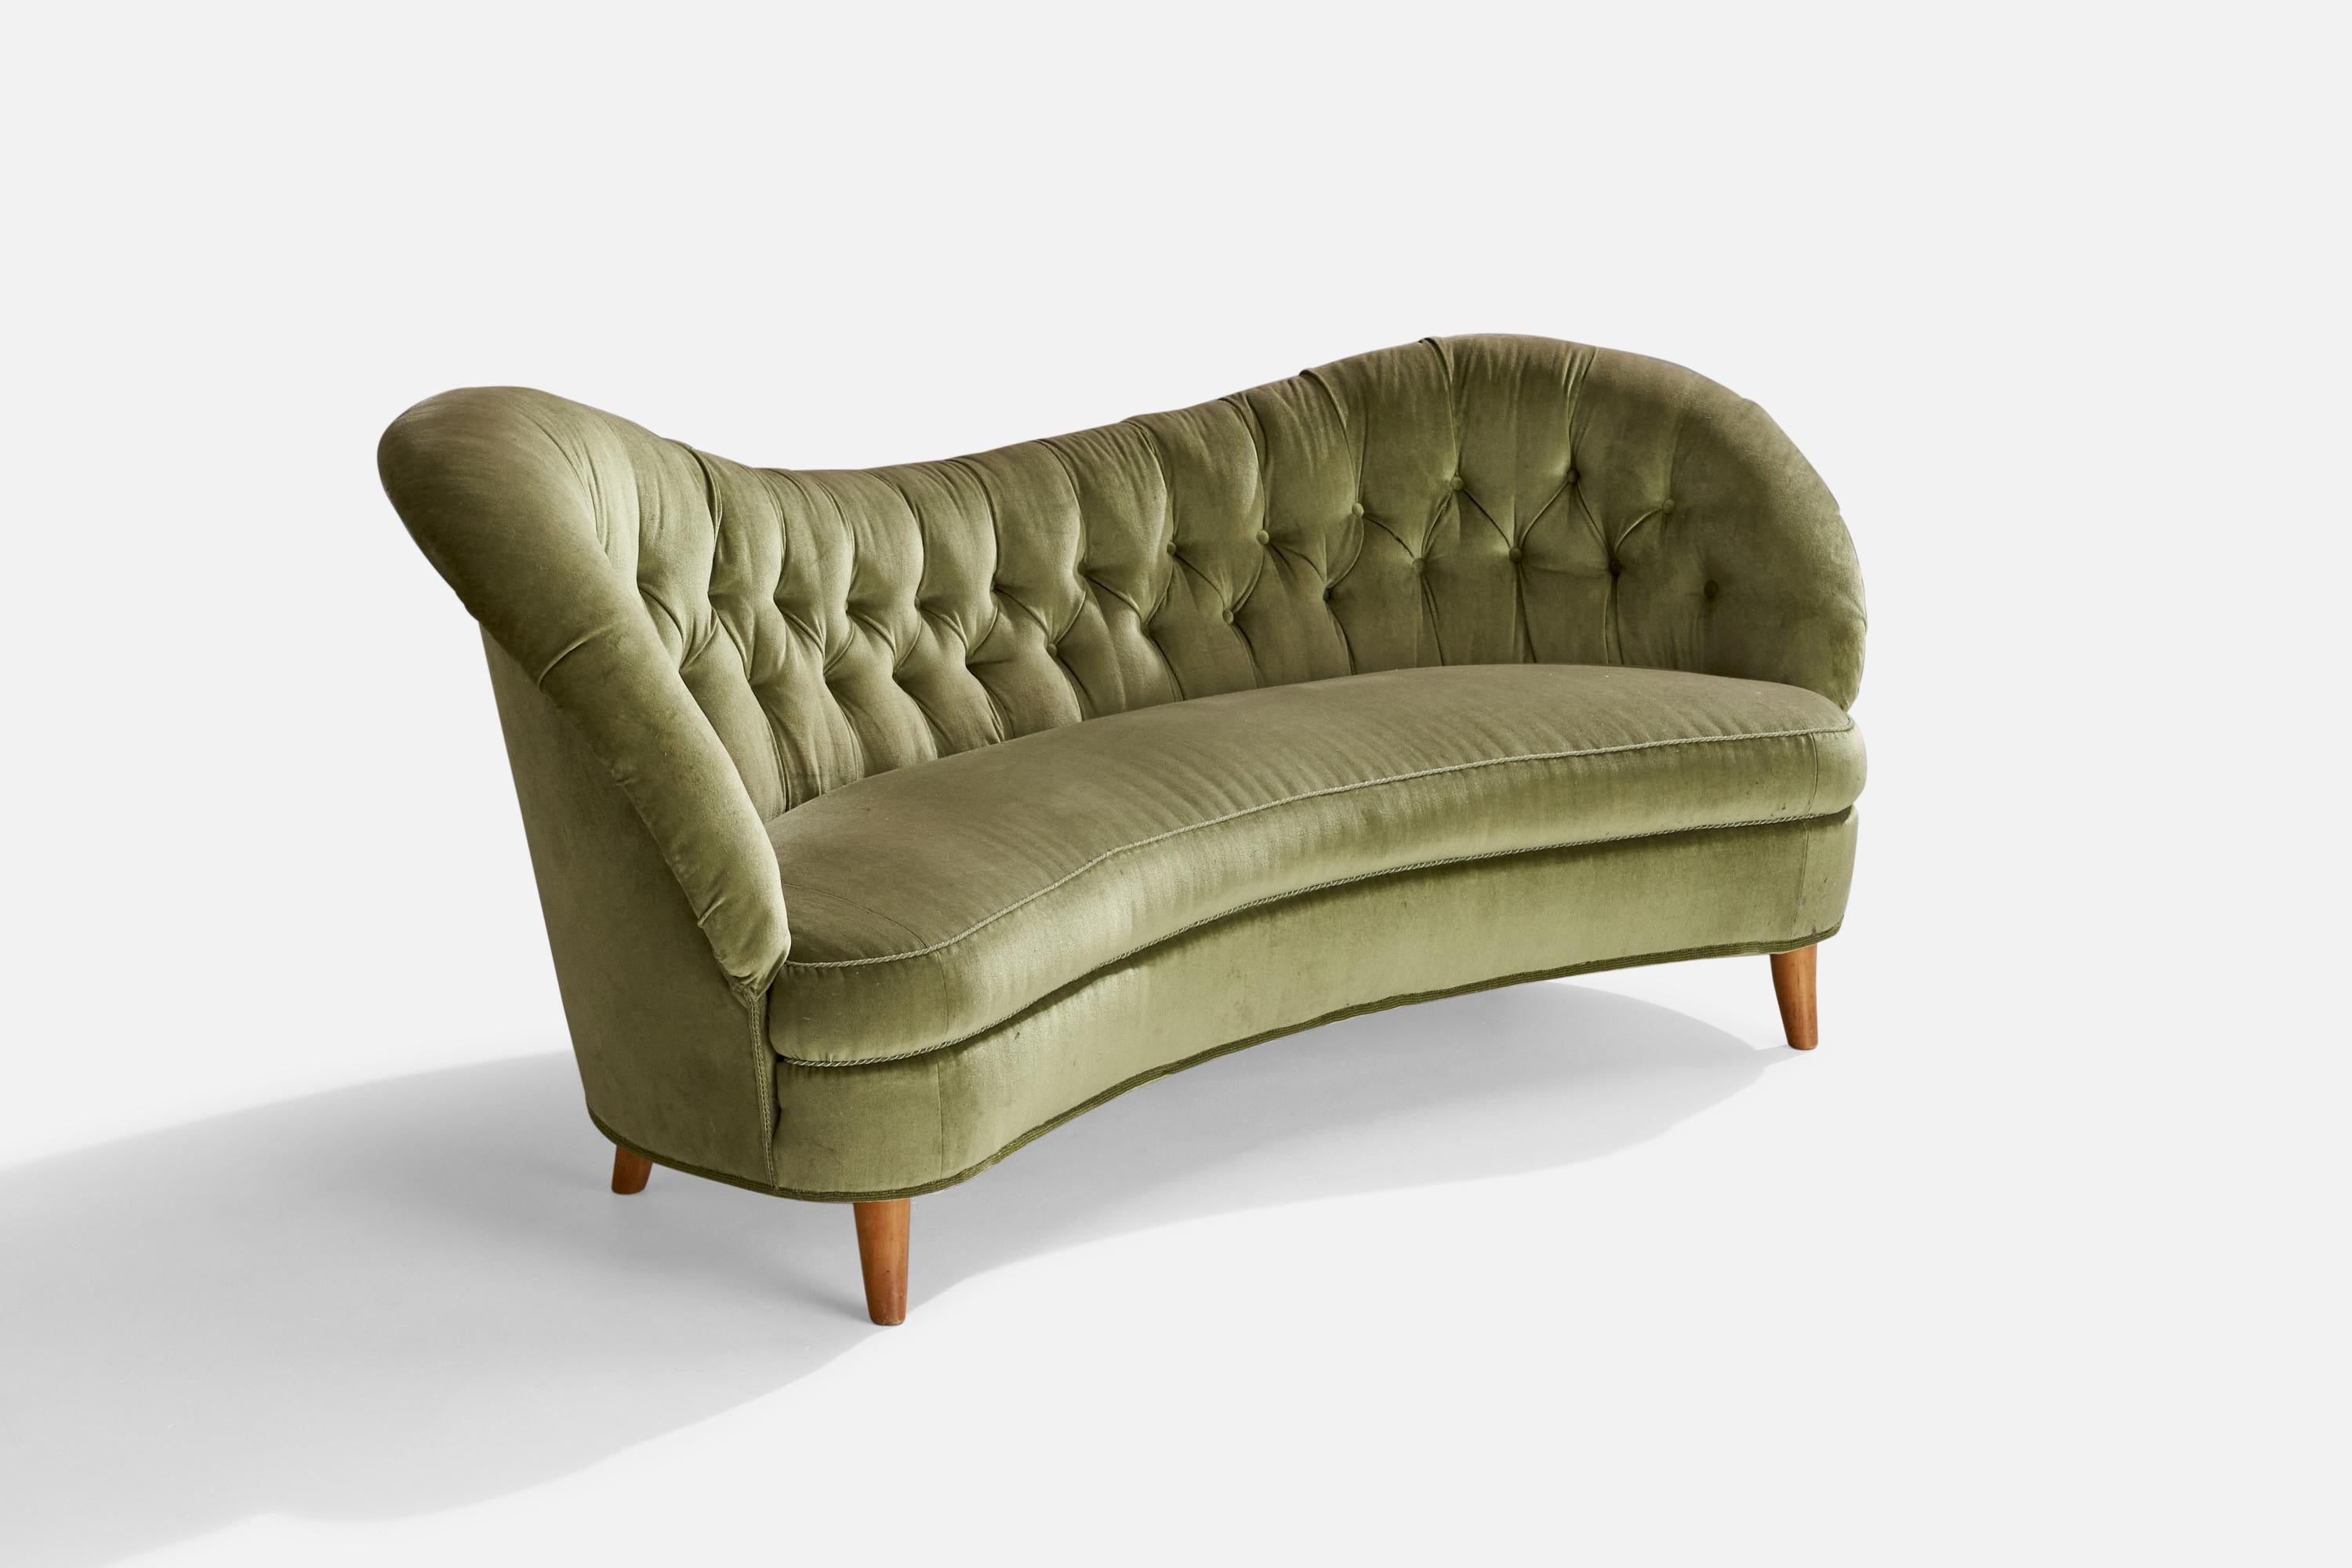 An organic wood and green velvet sofa, designed by Tor Wolfenstein and produced by Ditzingers, Sweden, c. 1940s.

Seat height: 17.5”
